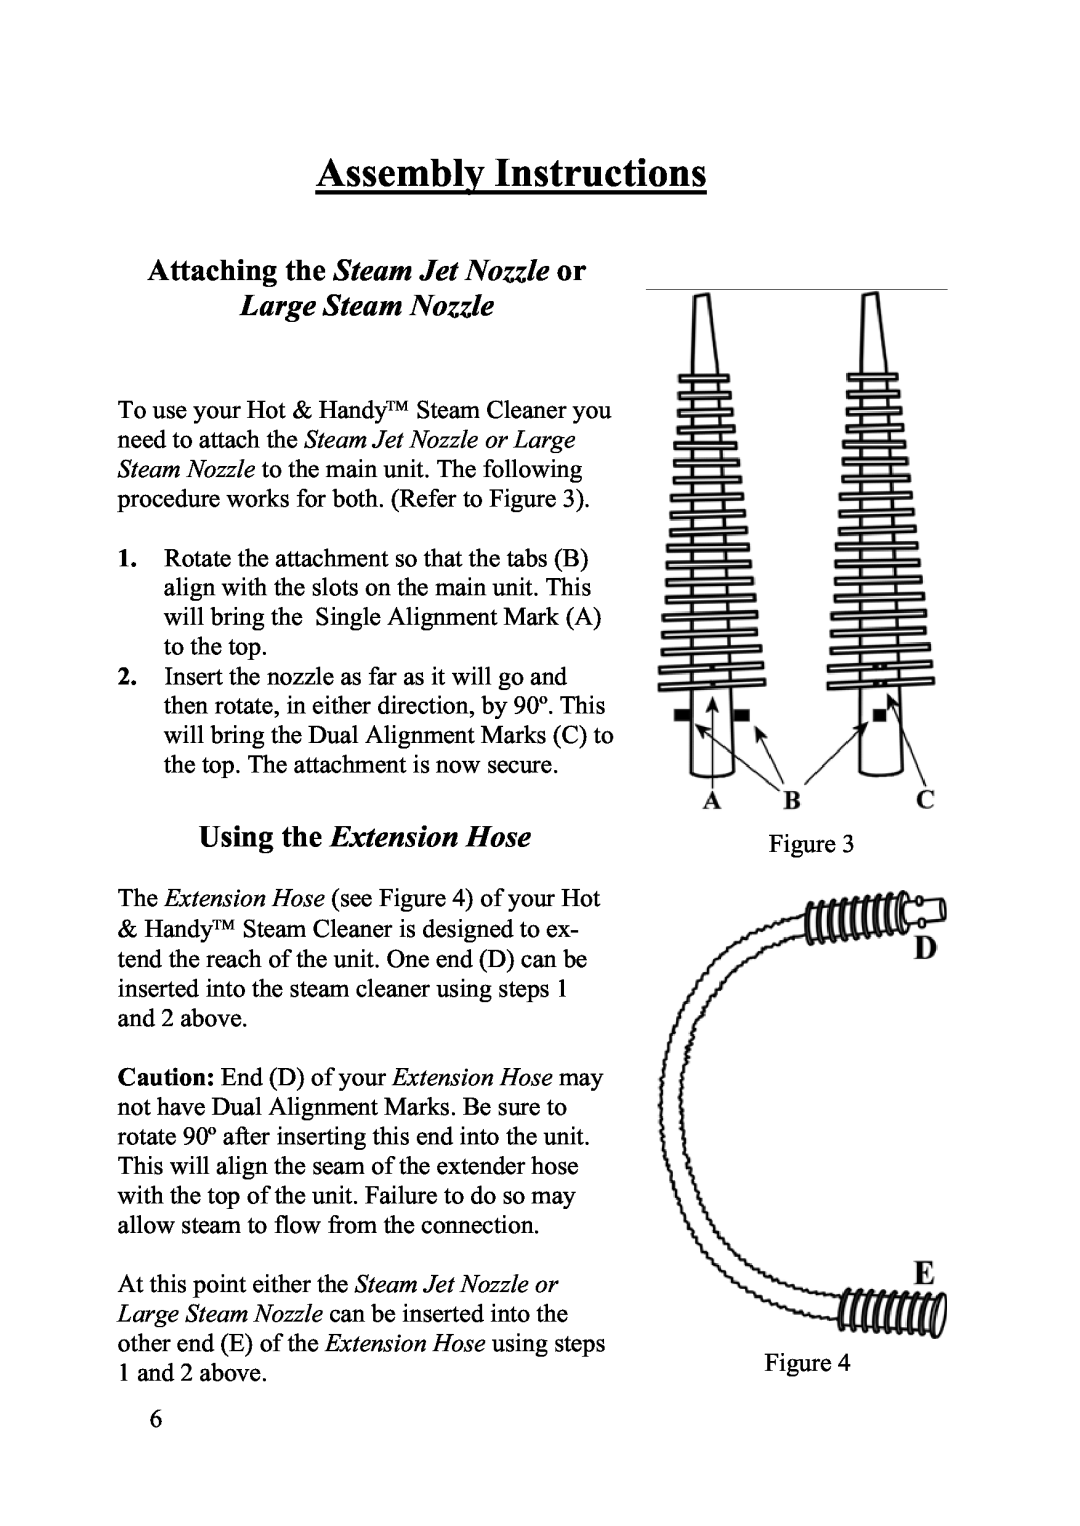 Top Innovations SF-220 instruction manual Assembly Instructions, Attaching the Steam Jet Nozzle or, Large Steam Nozzle 